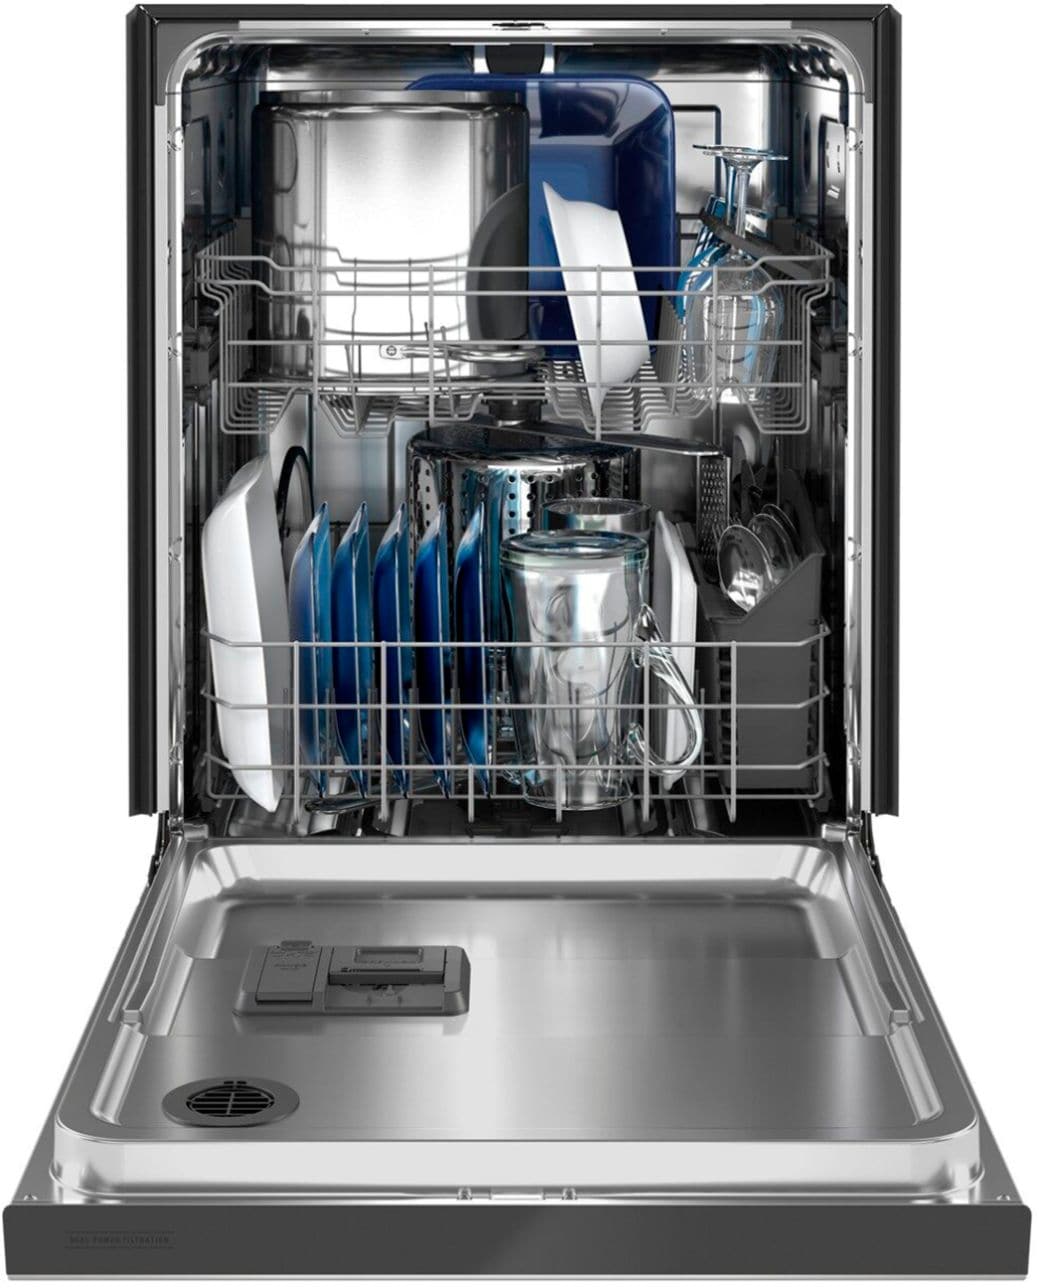 Maytag - 24" Front Control Built-In Dishwasher with Stainless Steel Tub, Dual Power Filtration, 50 dBA - Stainless steel_18